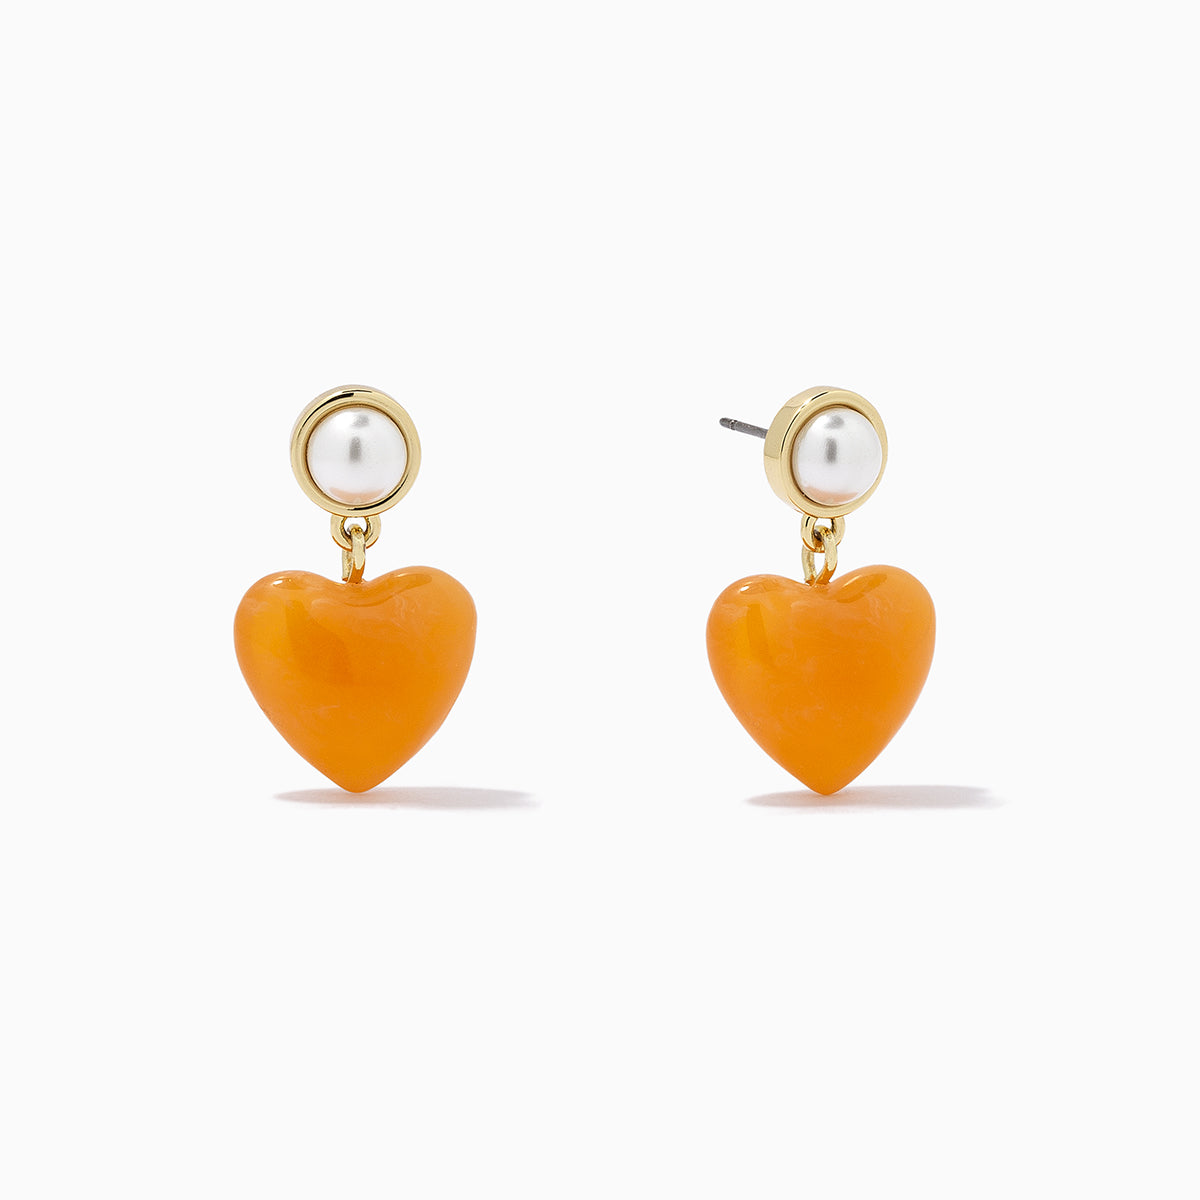 Candy Heart Earrings | Gold | Product Image | Uncommon James